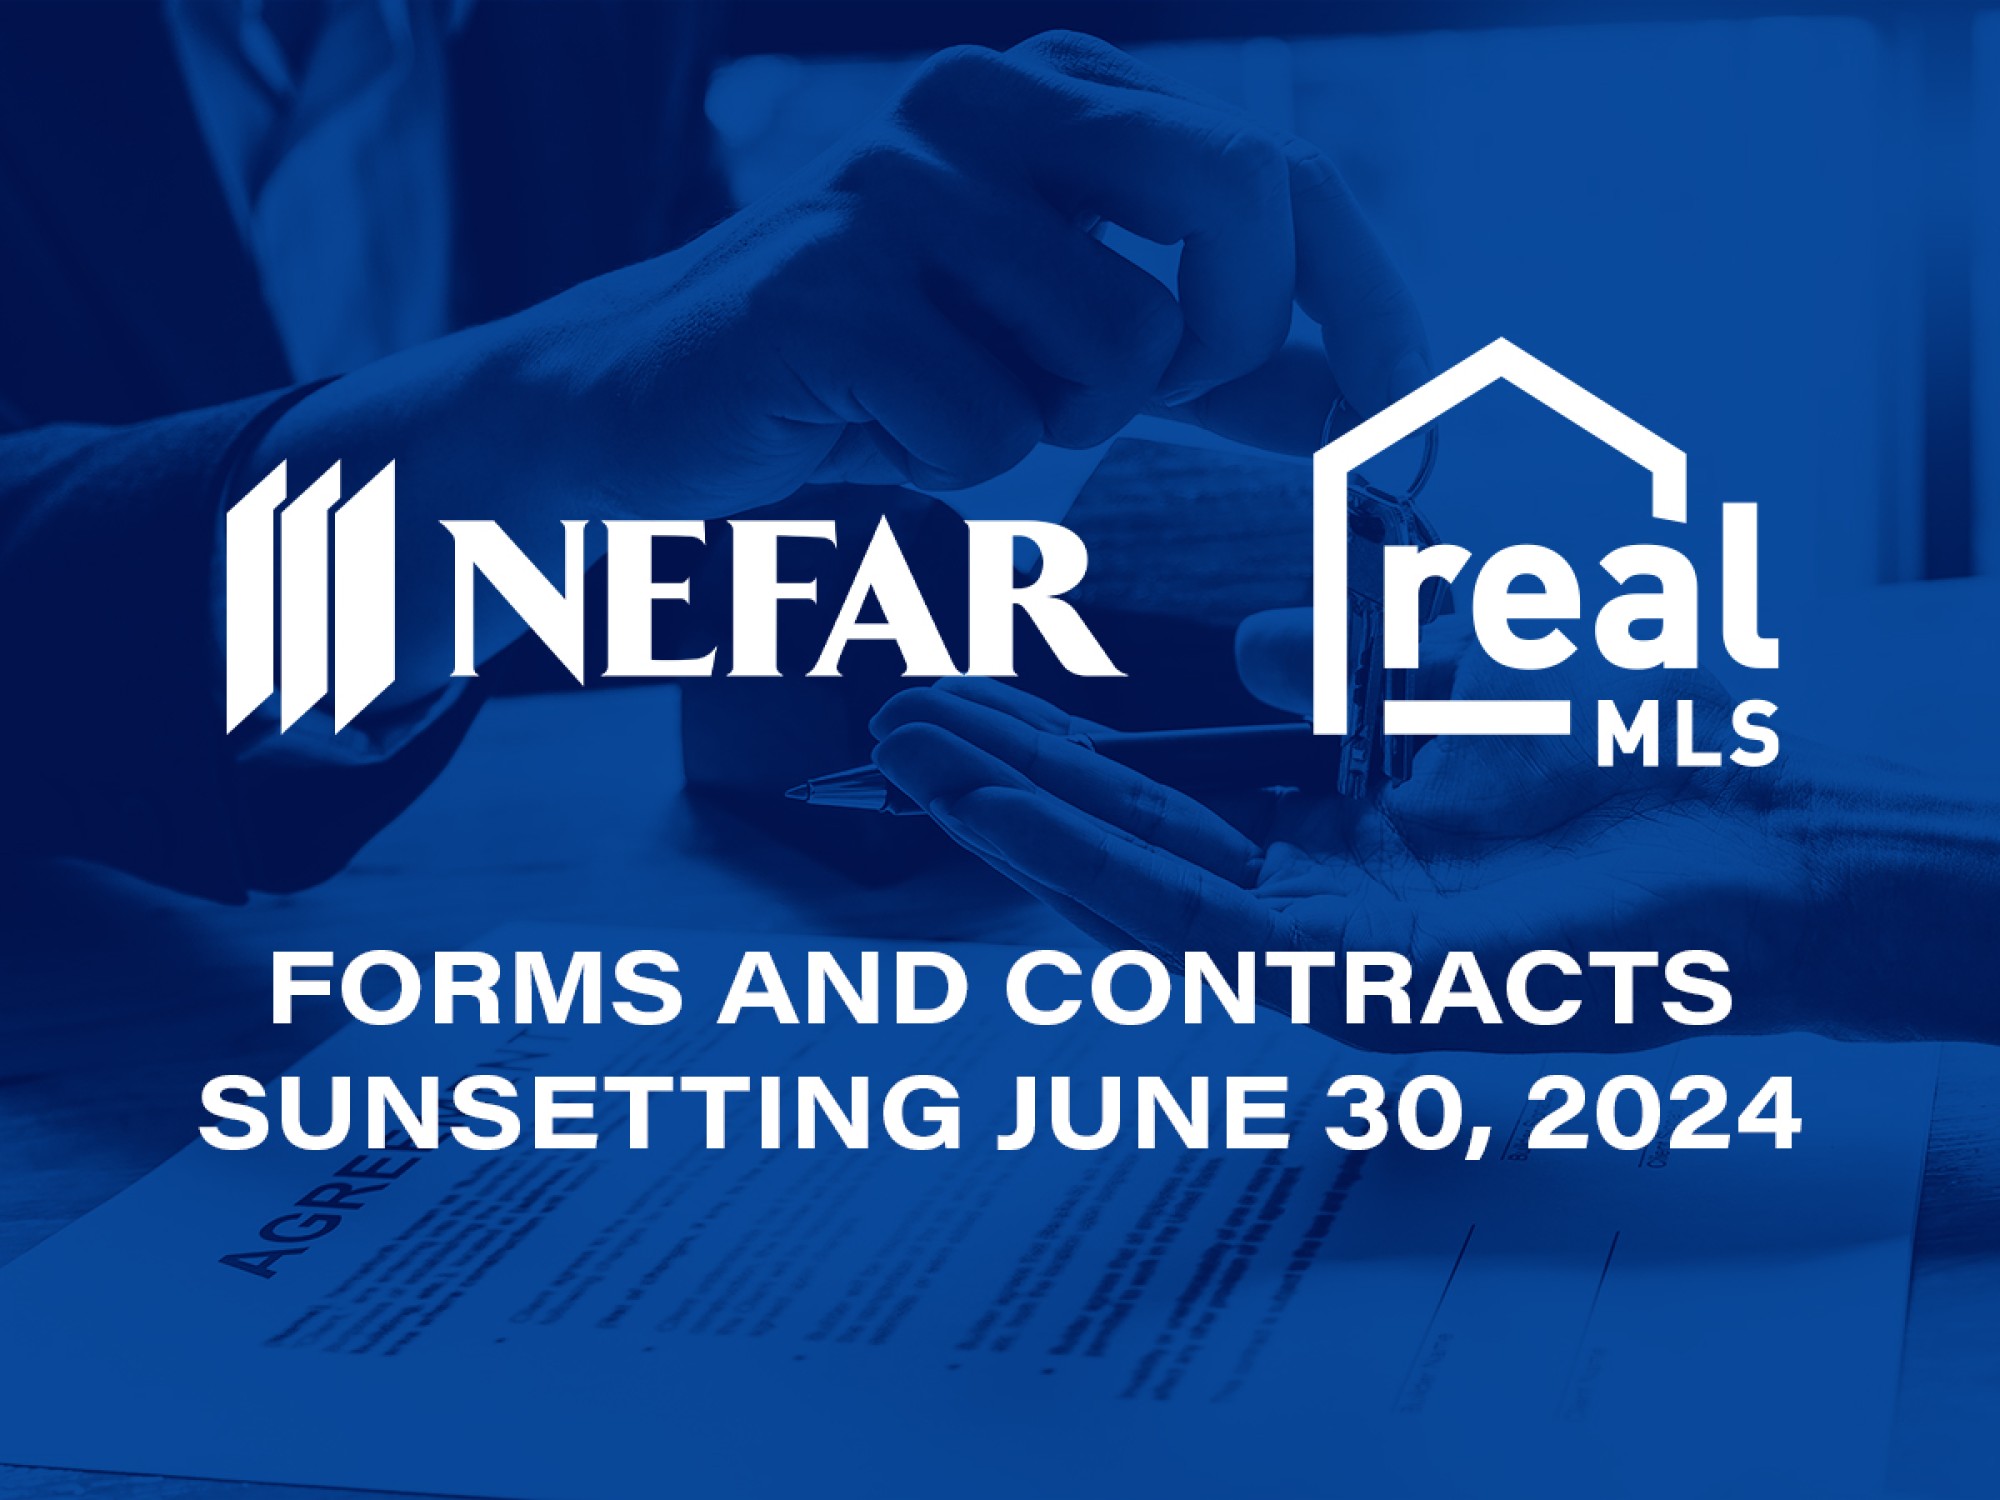 Joint Message from realMLS and NEFAR Regarding NEFAR/realMLS Forms and Contracts